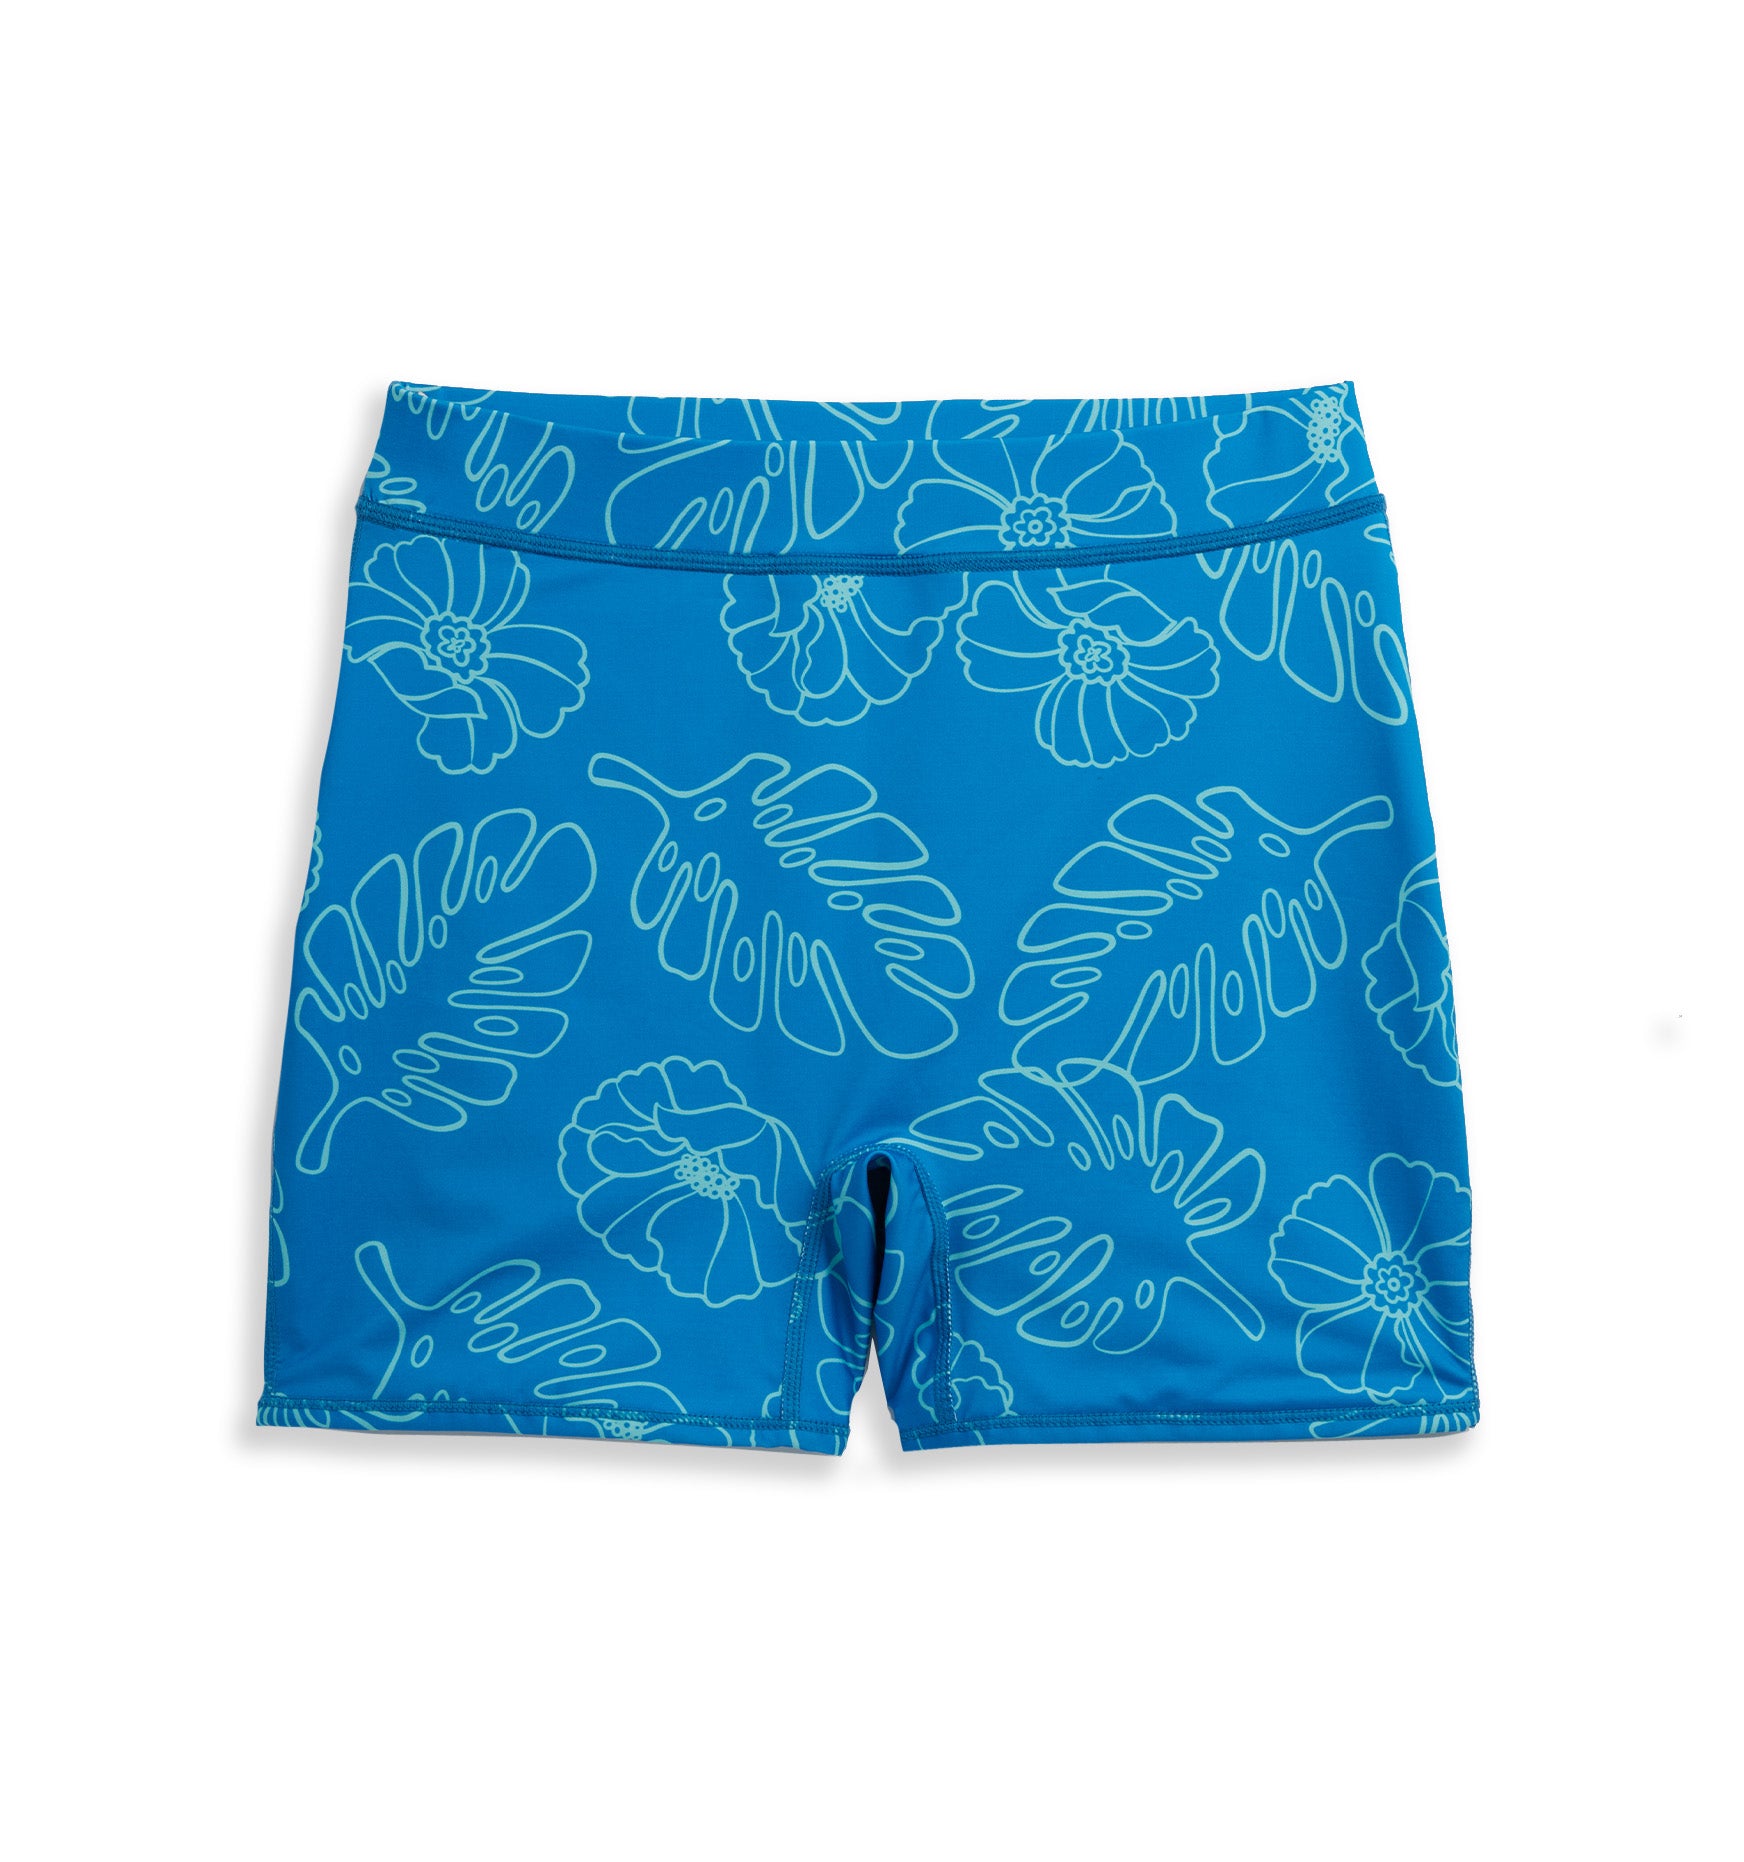 TomboyX Swim 4.5 Shorts, Quick Dry Bathing Suit Bottom Mid-Rise Trunks,  Bike Short Style, Plus Size Inclusive (XS-4X) Save The Turtles Large